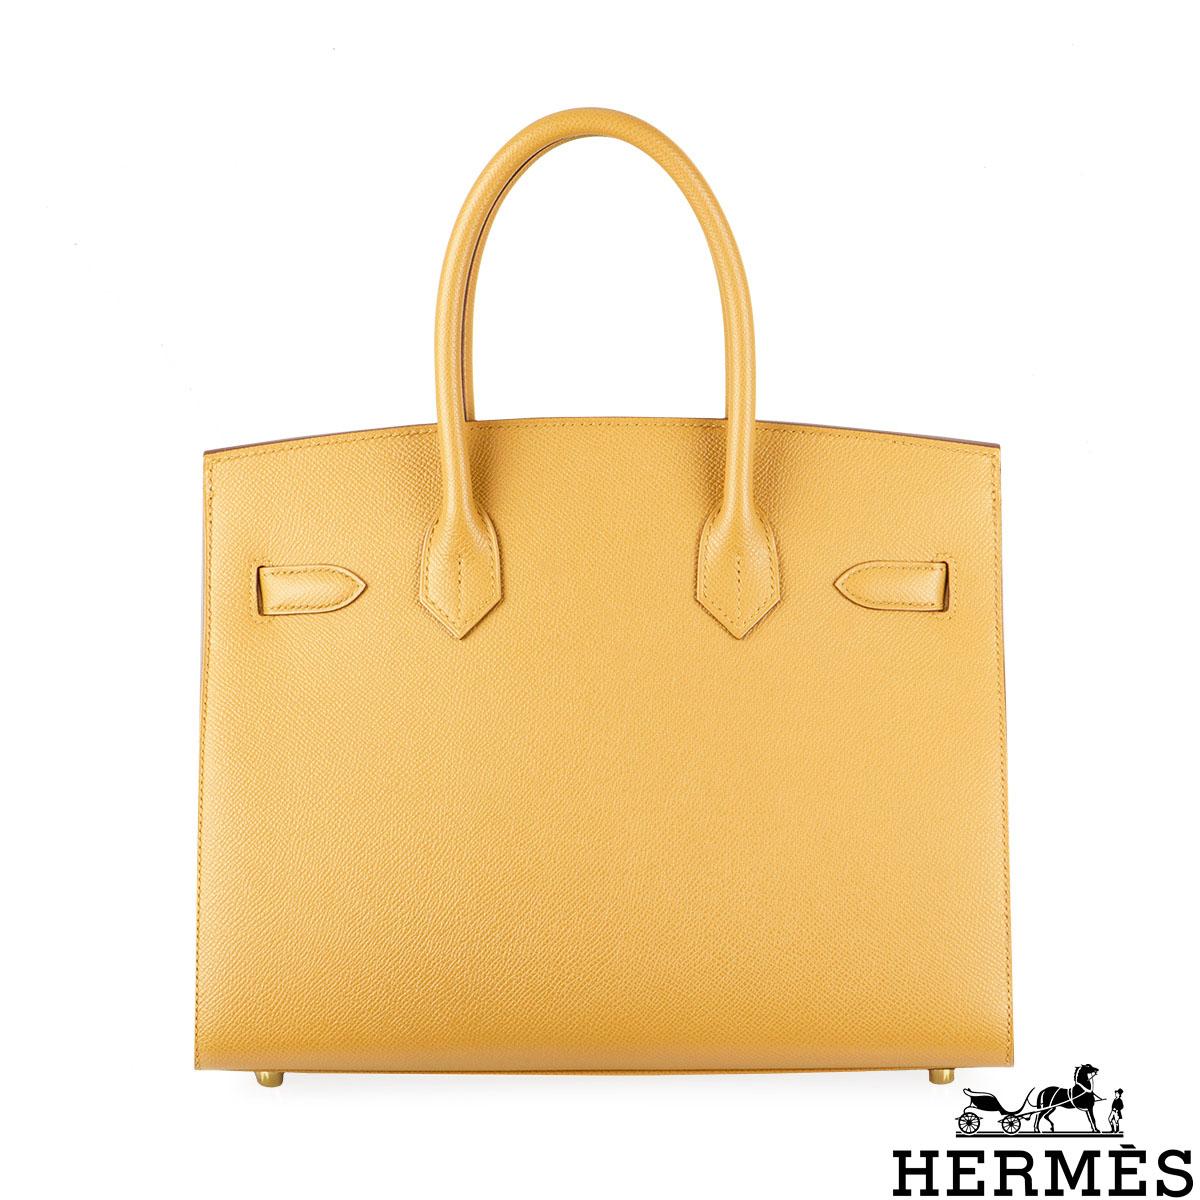 A stylish Hermès 30cm Birkin handbag. The exterior of this Birkin is in Sesame Veau Epsom leather with tonal stitching. It features gold tone hardware with two straps and front toggle closure. The interior comprises of a zip pocket with an Hermès